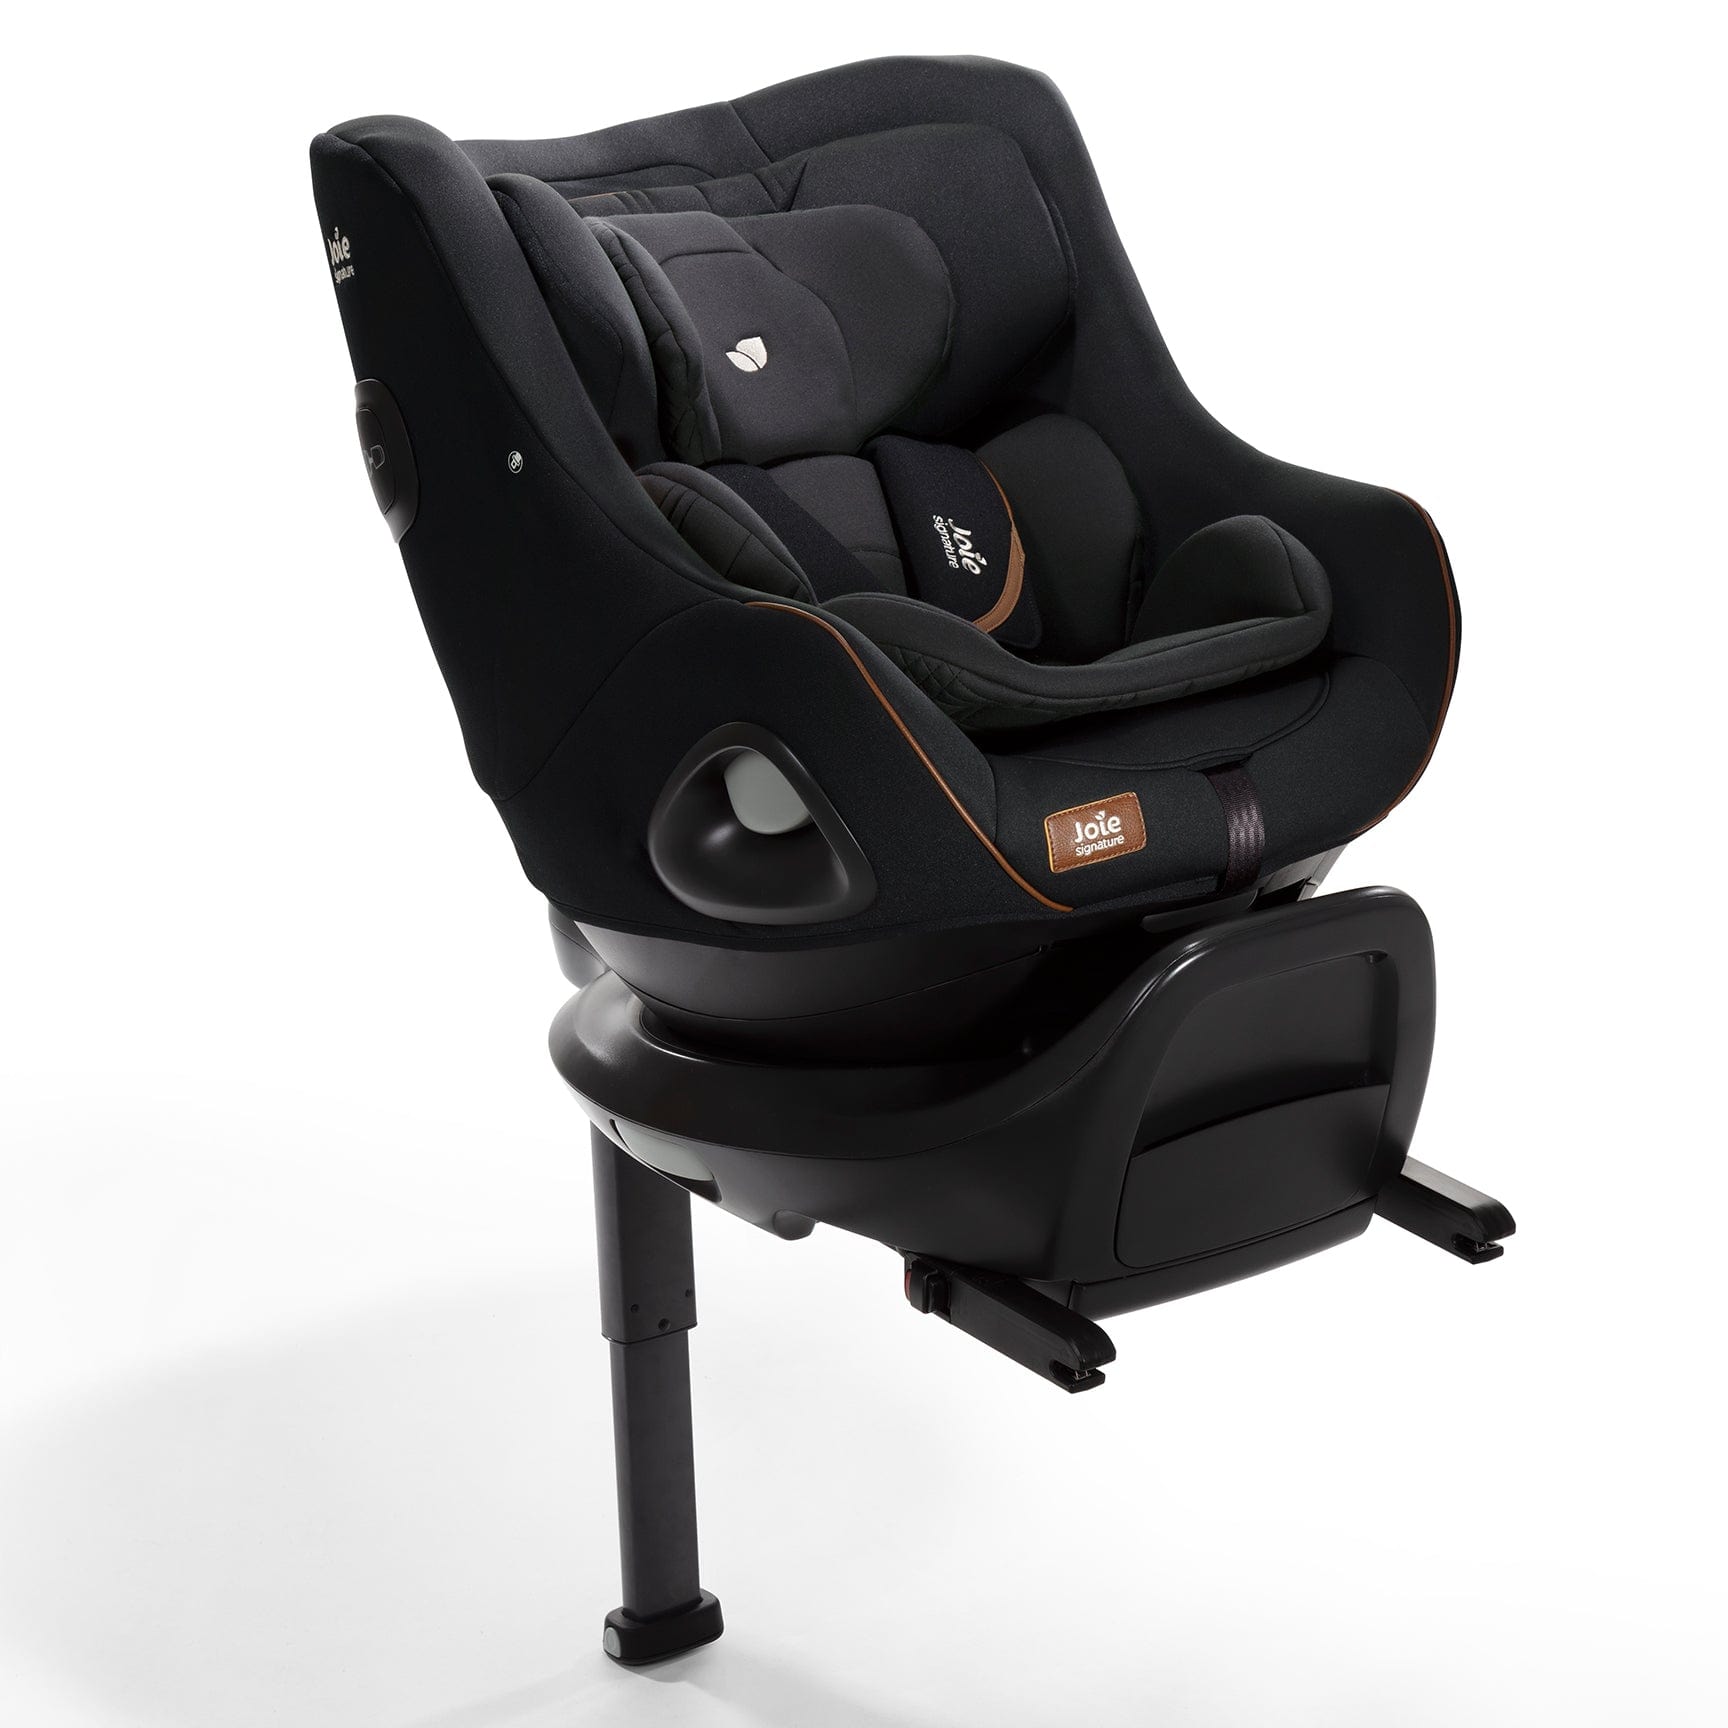 Joie i-Size car seats Joie i-Harbour and i-Base Encore - Eclipse 12220-ECL